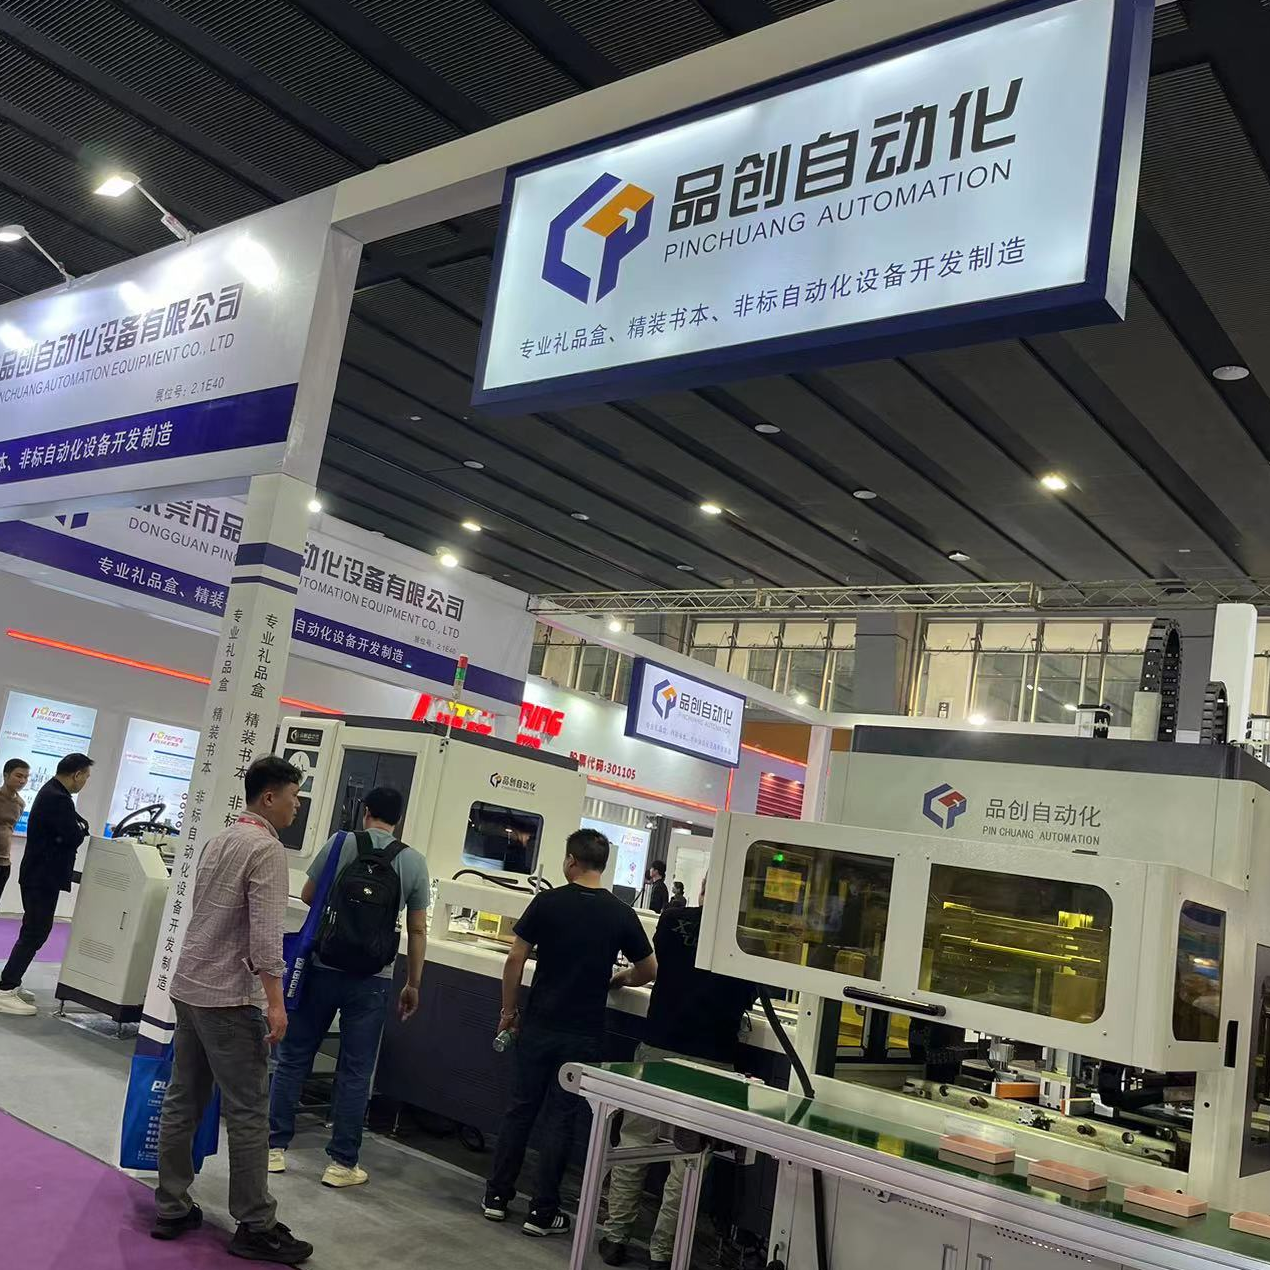 Pinchuang Automation Equipment participated in the 2023 Guangzhou Exhibition